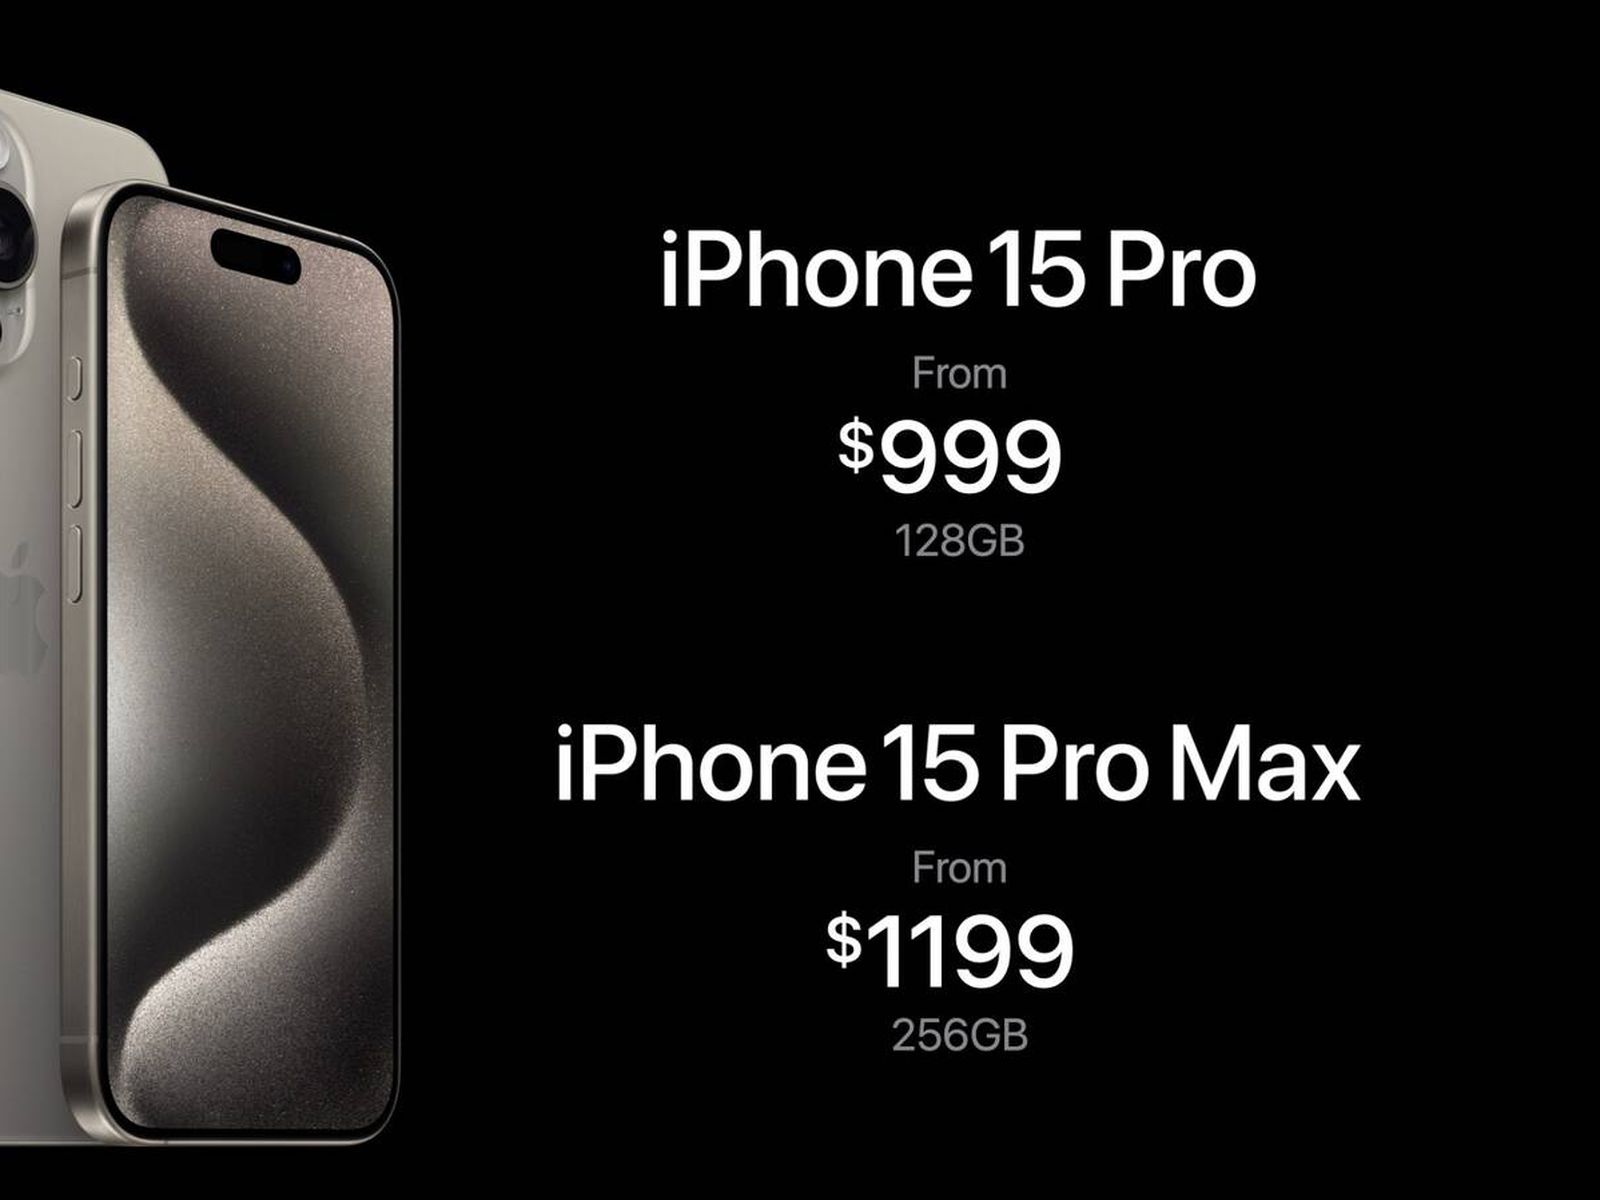 iPhone 15 Pro Max Now Starts at 256GB of Storage for $1,199